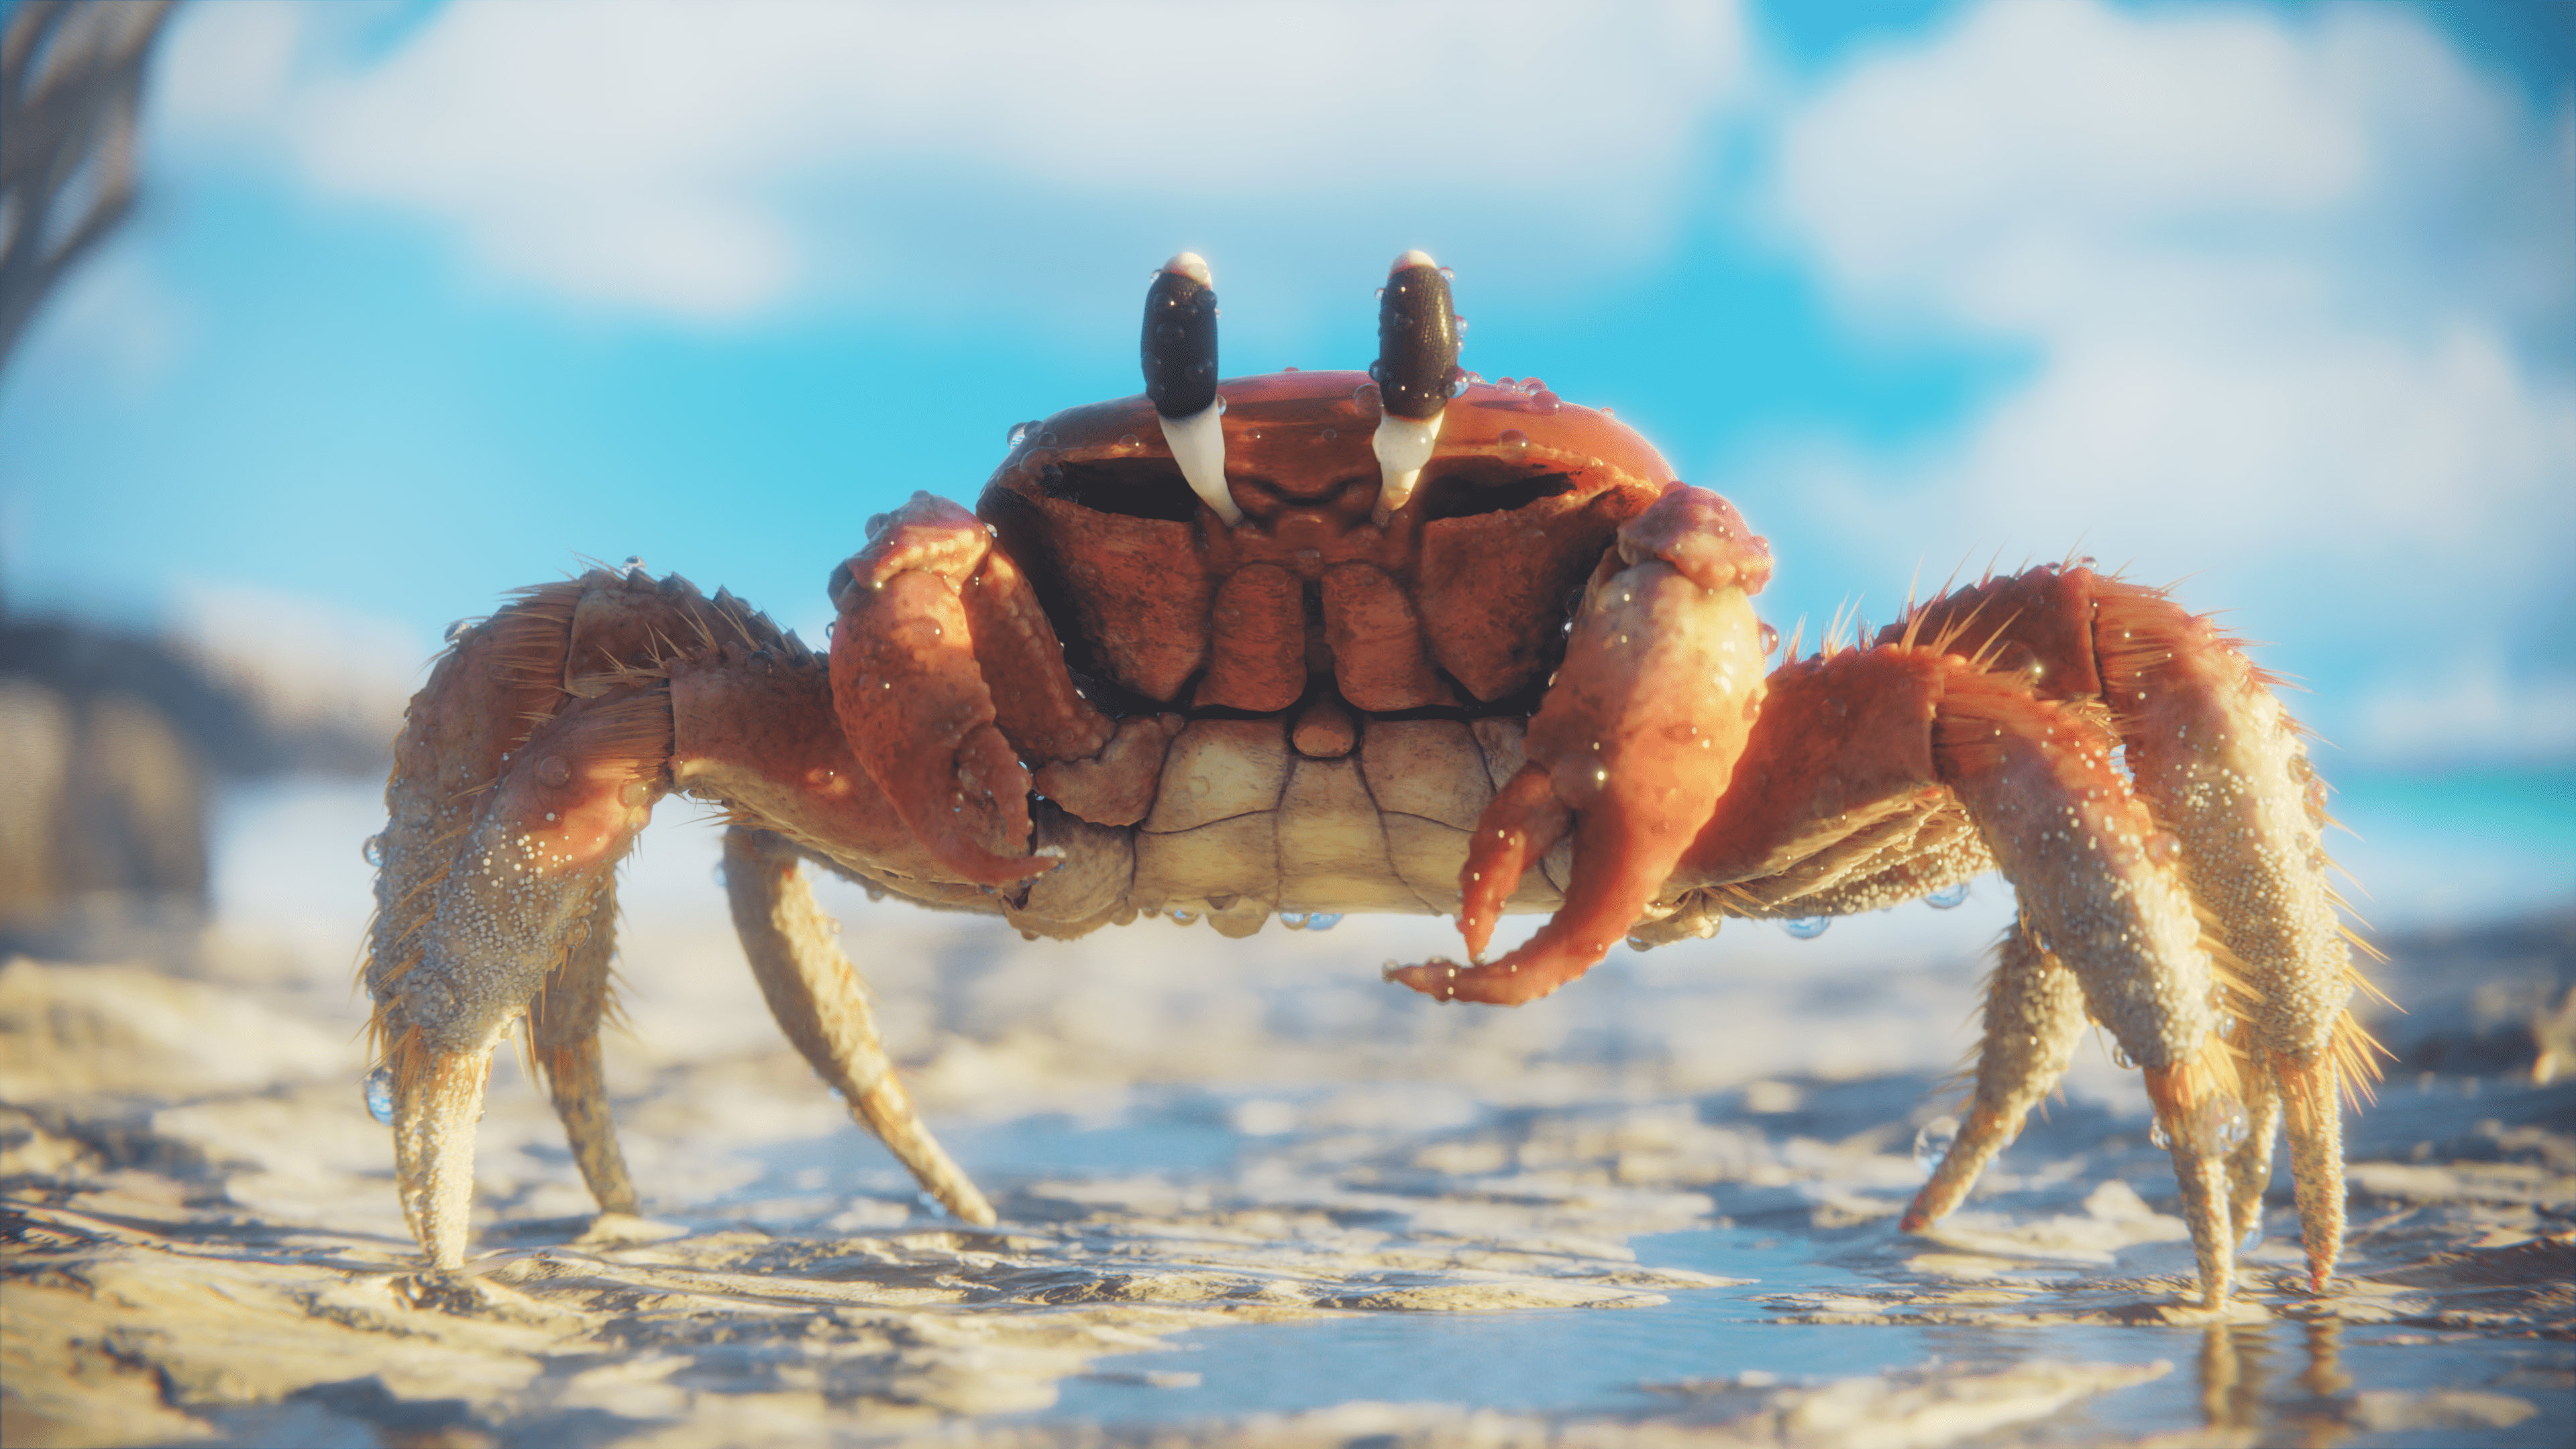 Sculpted a Ghost Crab as a bit of a ZBrush refresher.